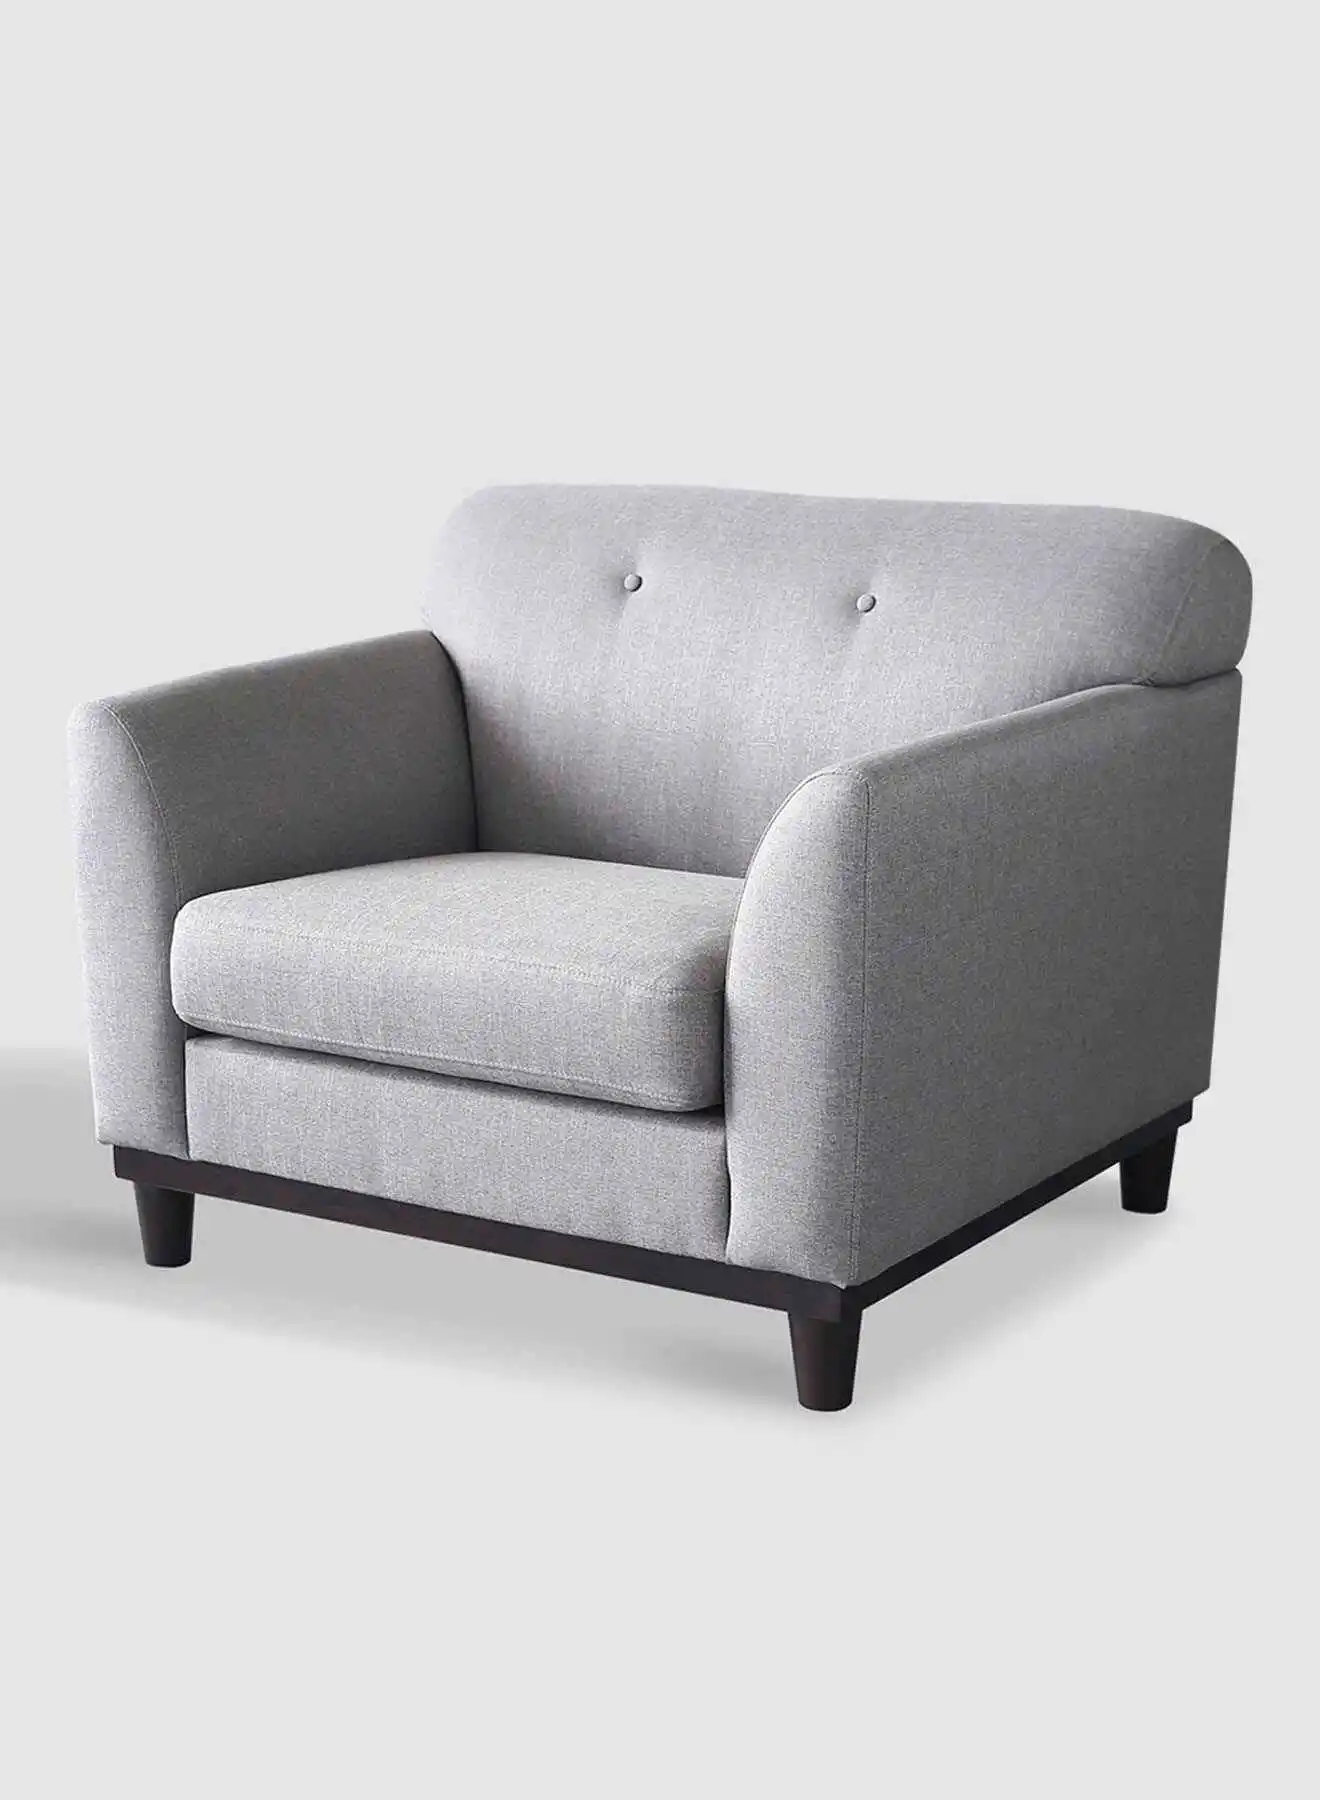 Switch Armchair - Upholstered Fabric Grey Wood Couch - 1010 X 940 X 790 - Relaxing Sofa